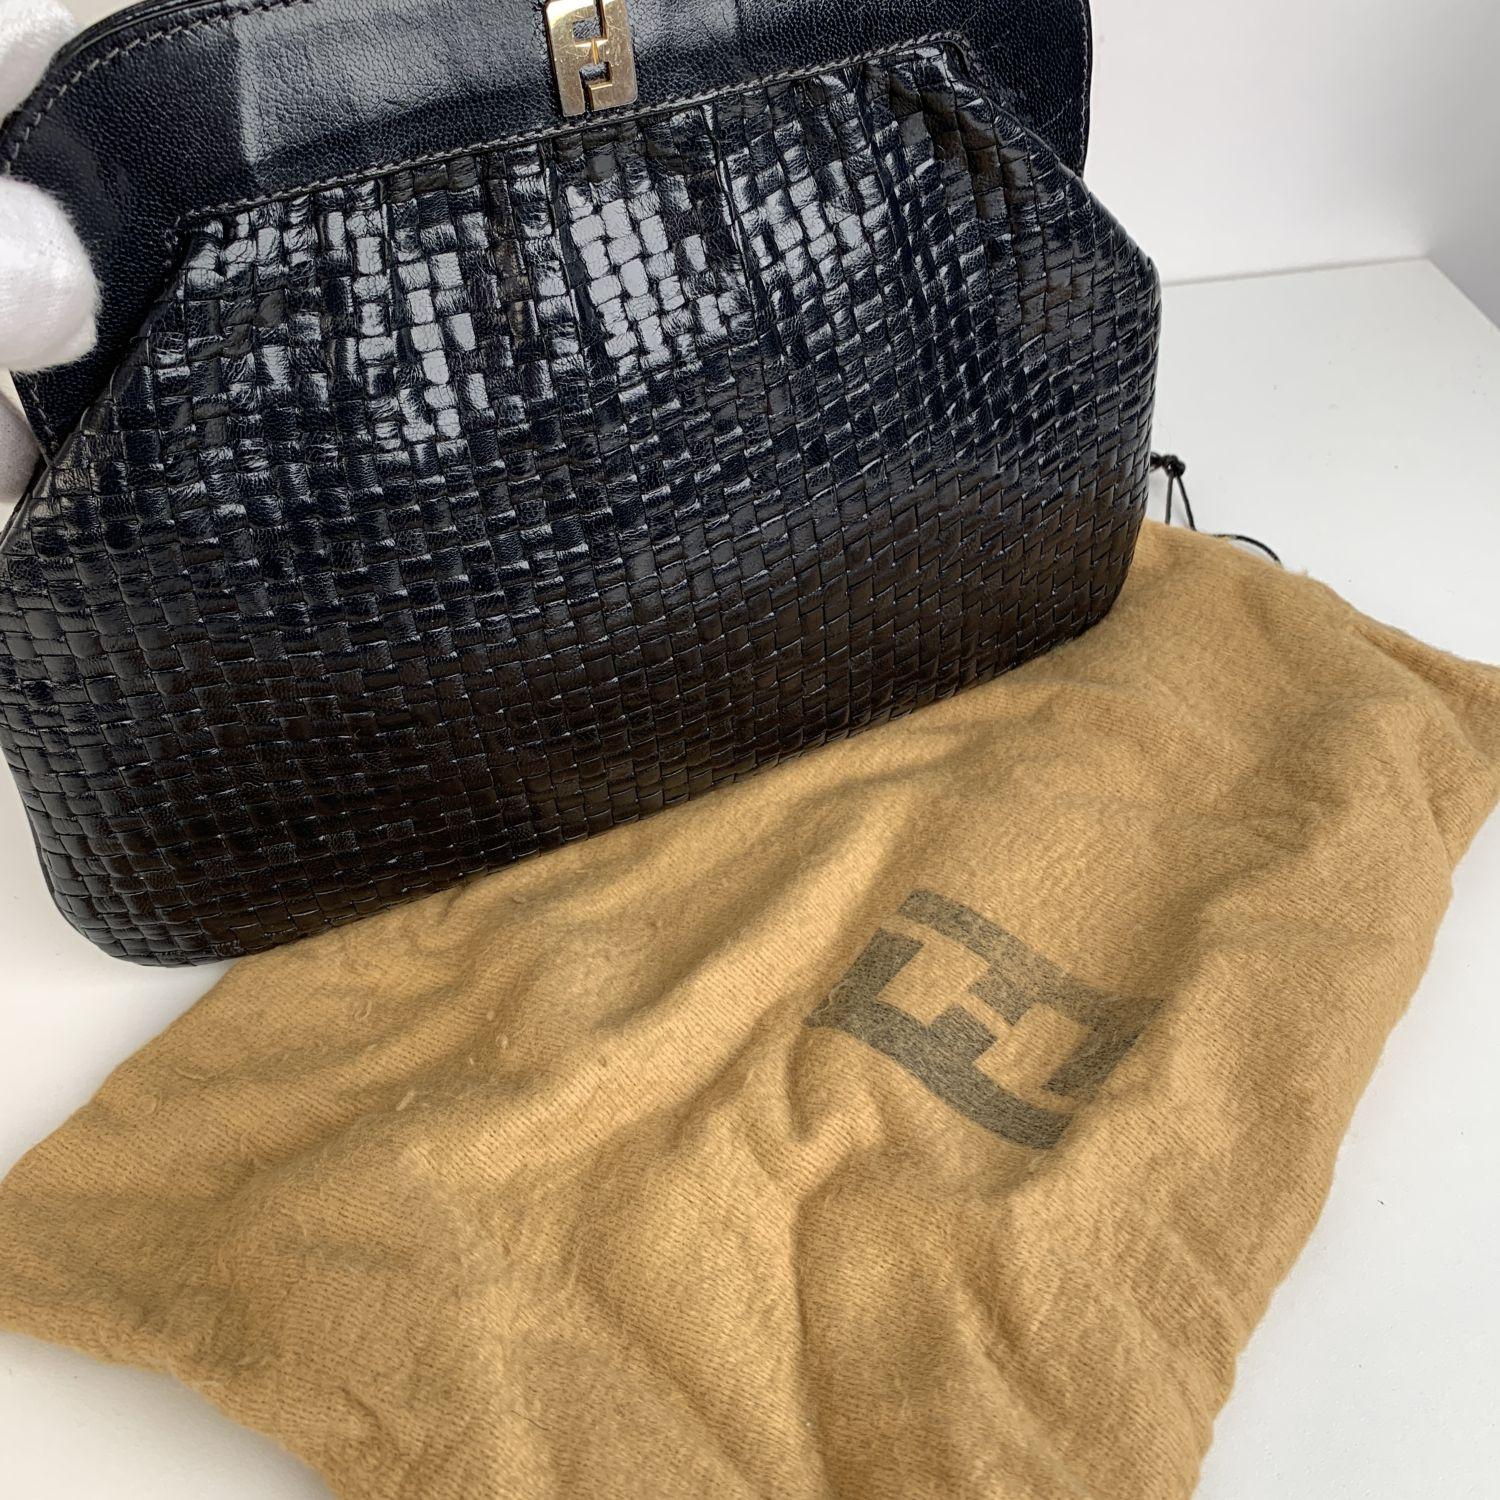 Fendi Vintage Navy Blue Woven Leather Clutch Bag. Navy Blue woven leather. FF - FENDI metal logo on the front. 'FENDI - Roma - Made in Italy'embossed inside. Framed top with button closure. Blue lining. 1 side zip pocket